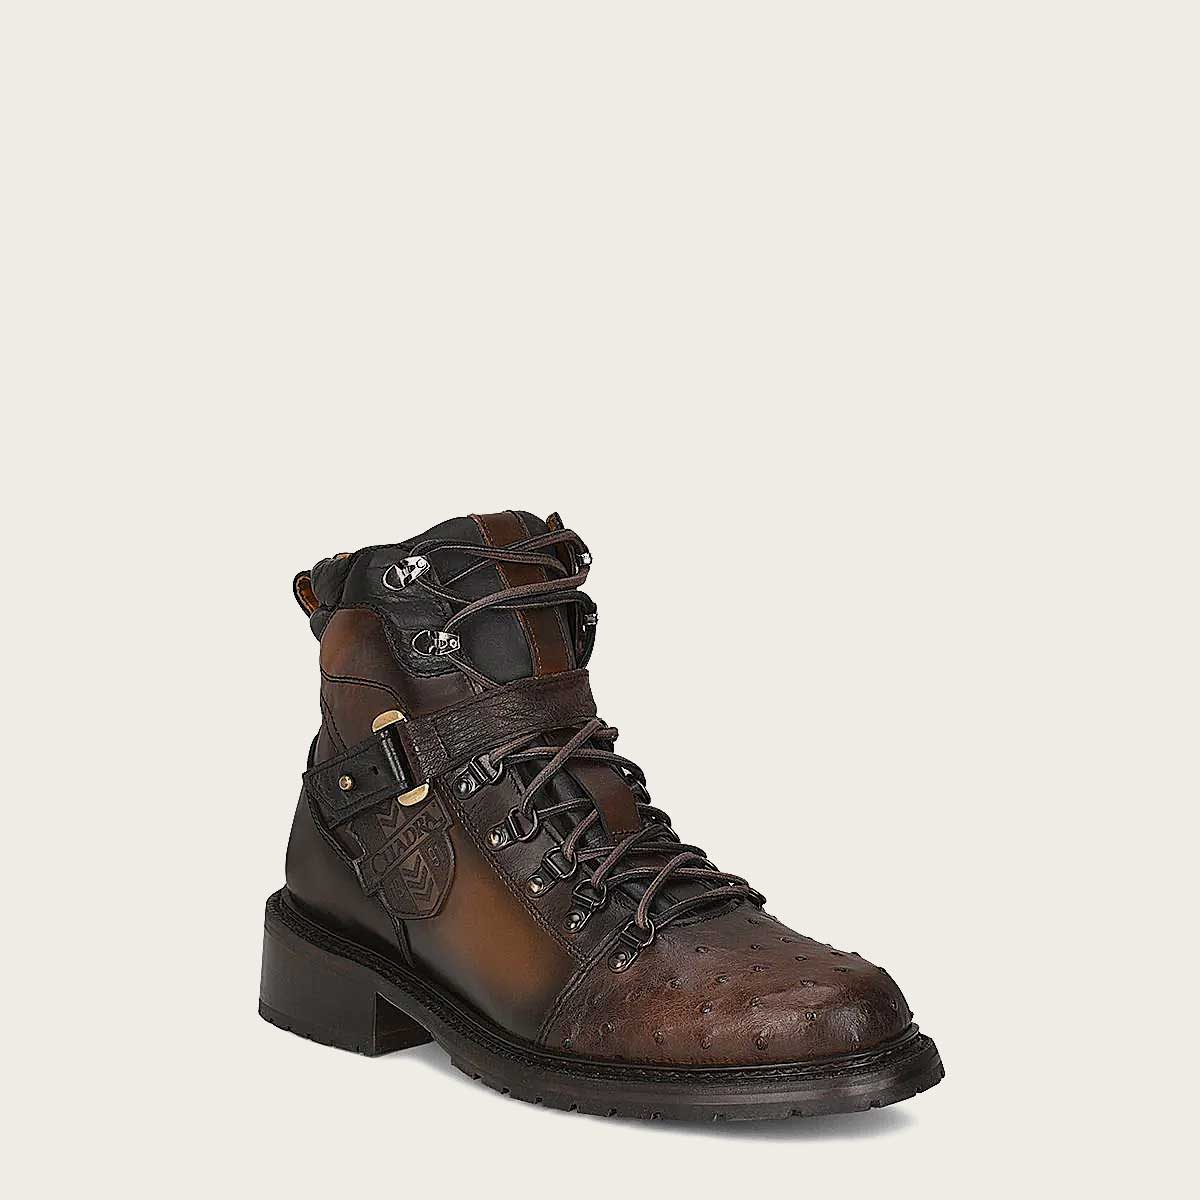 Upgrade your footwear with our urban brown ostrich leather boot - a perfect blend of style and sophistication